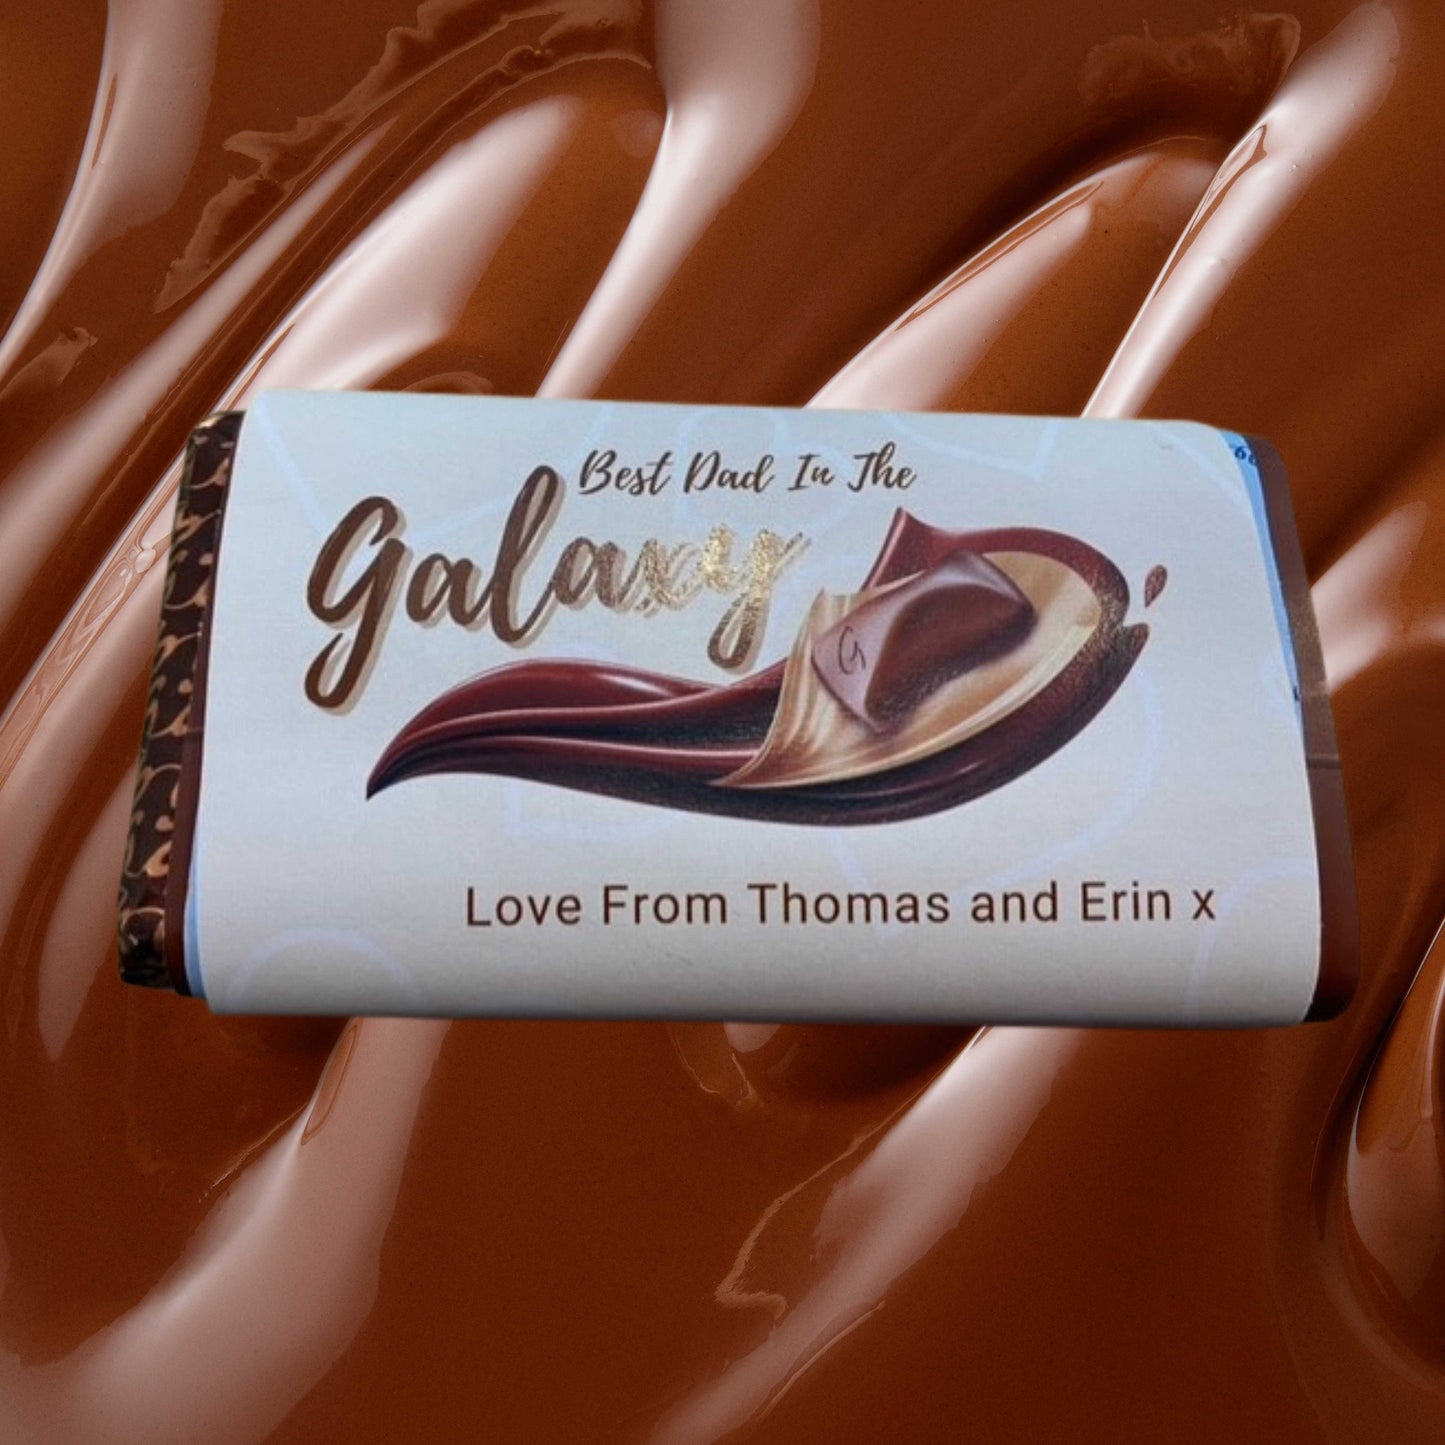 Best Dad in the Galaxy wrapped bar of Galaxy chocolate personalised